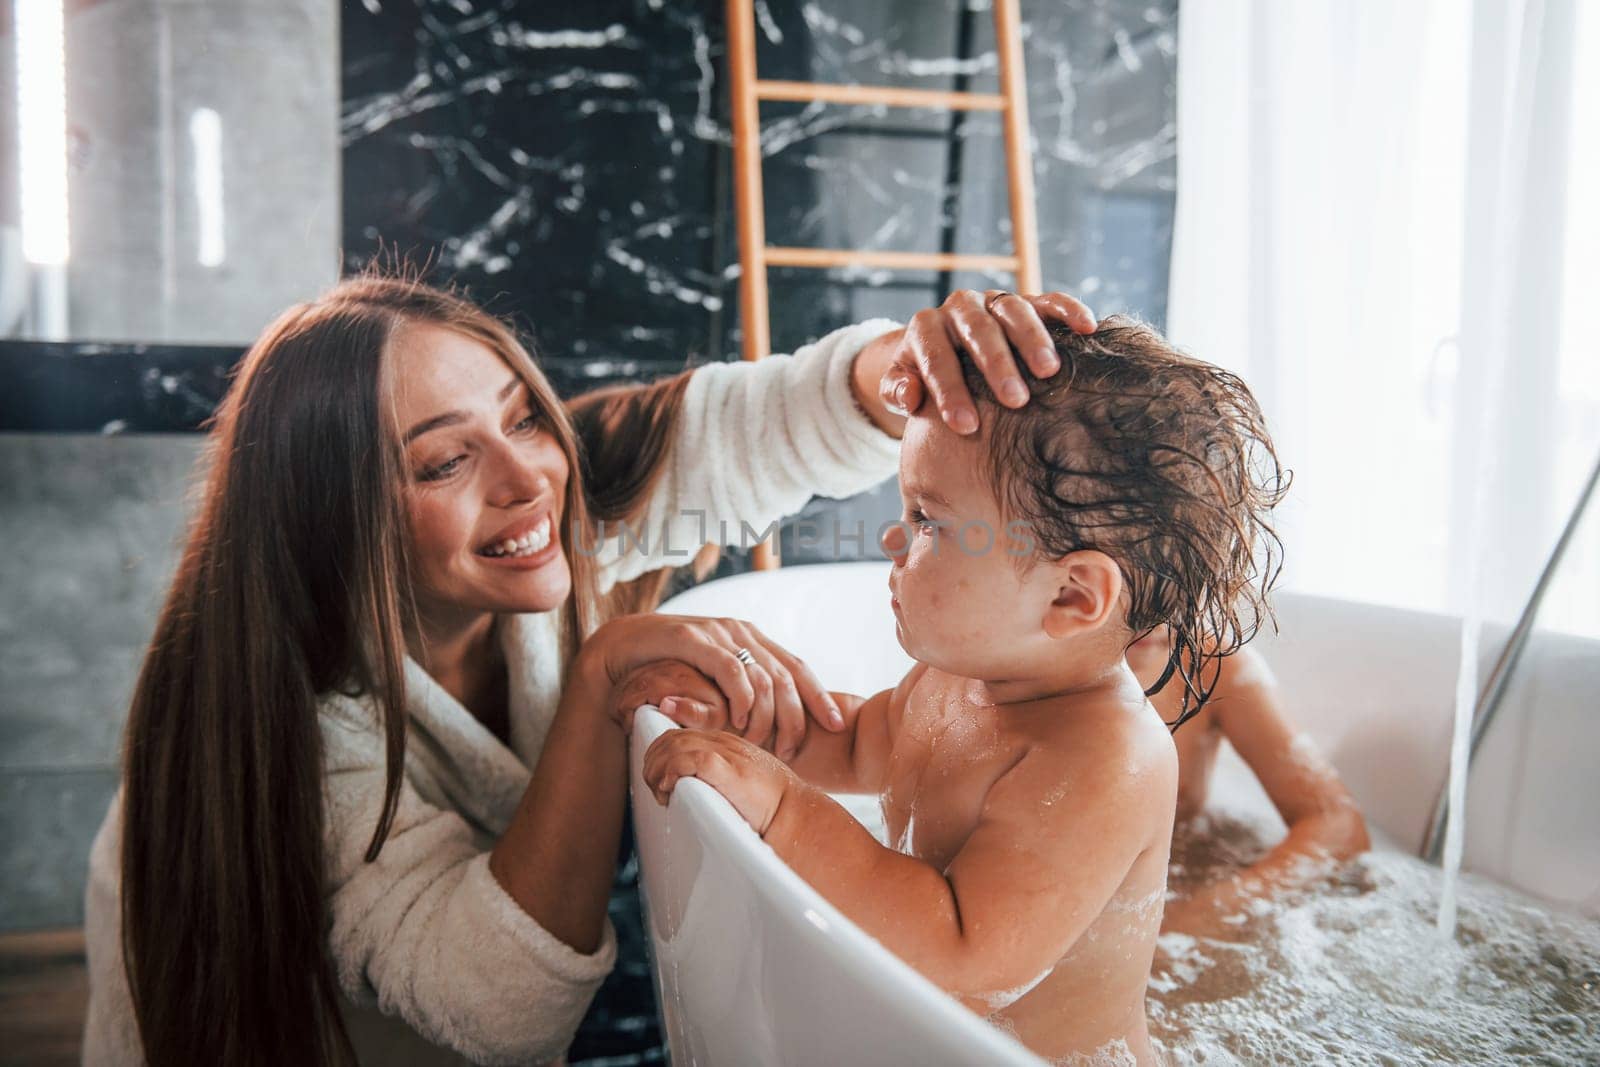 Young mother helps her son and daughter. Two kids washing in the bath.